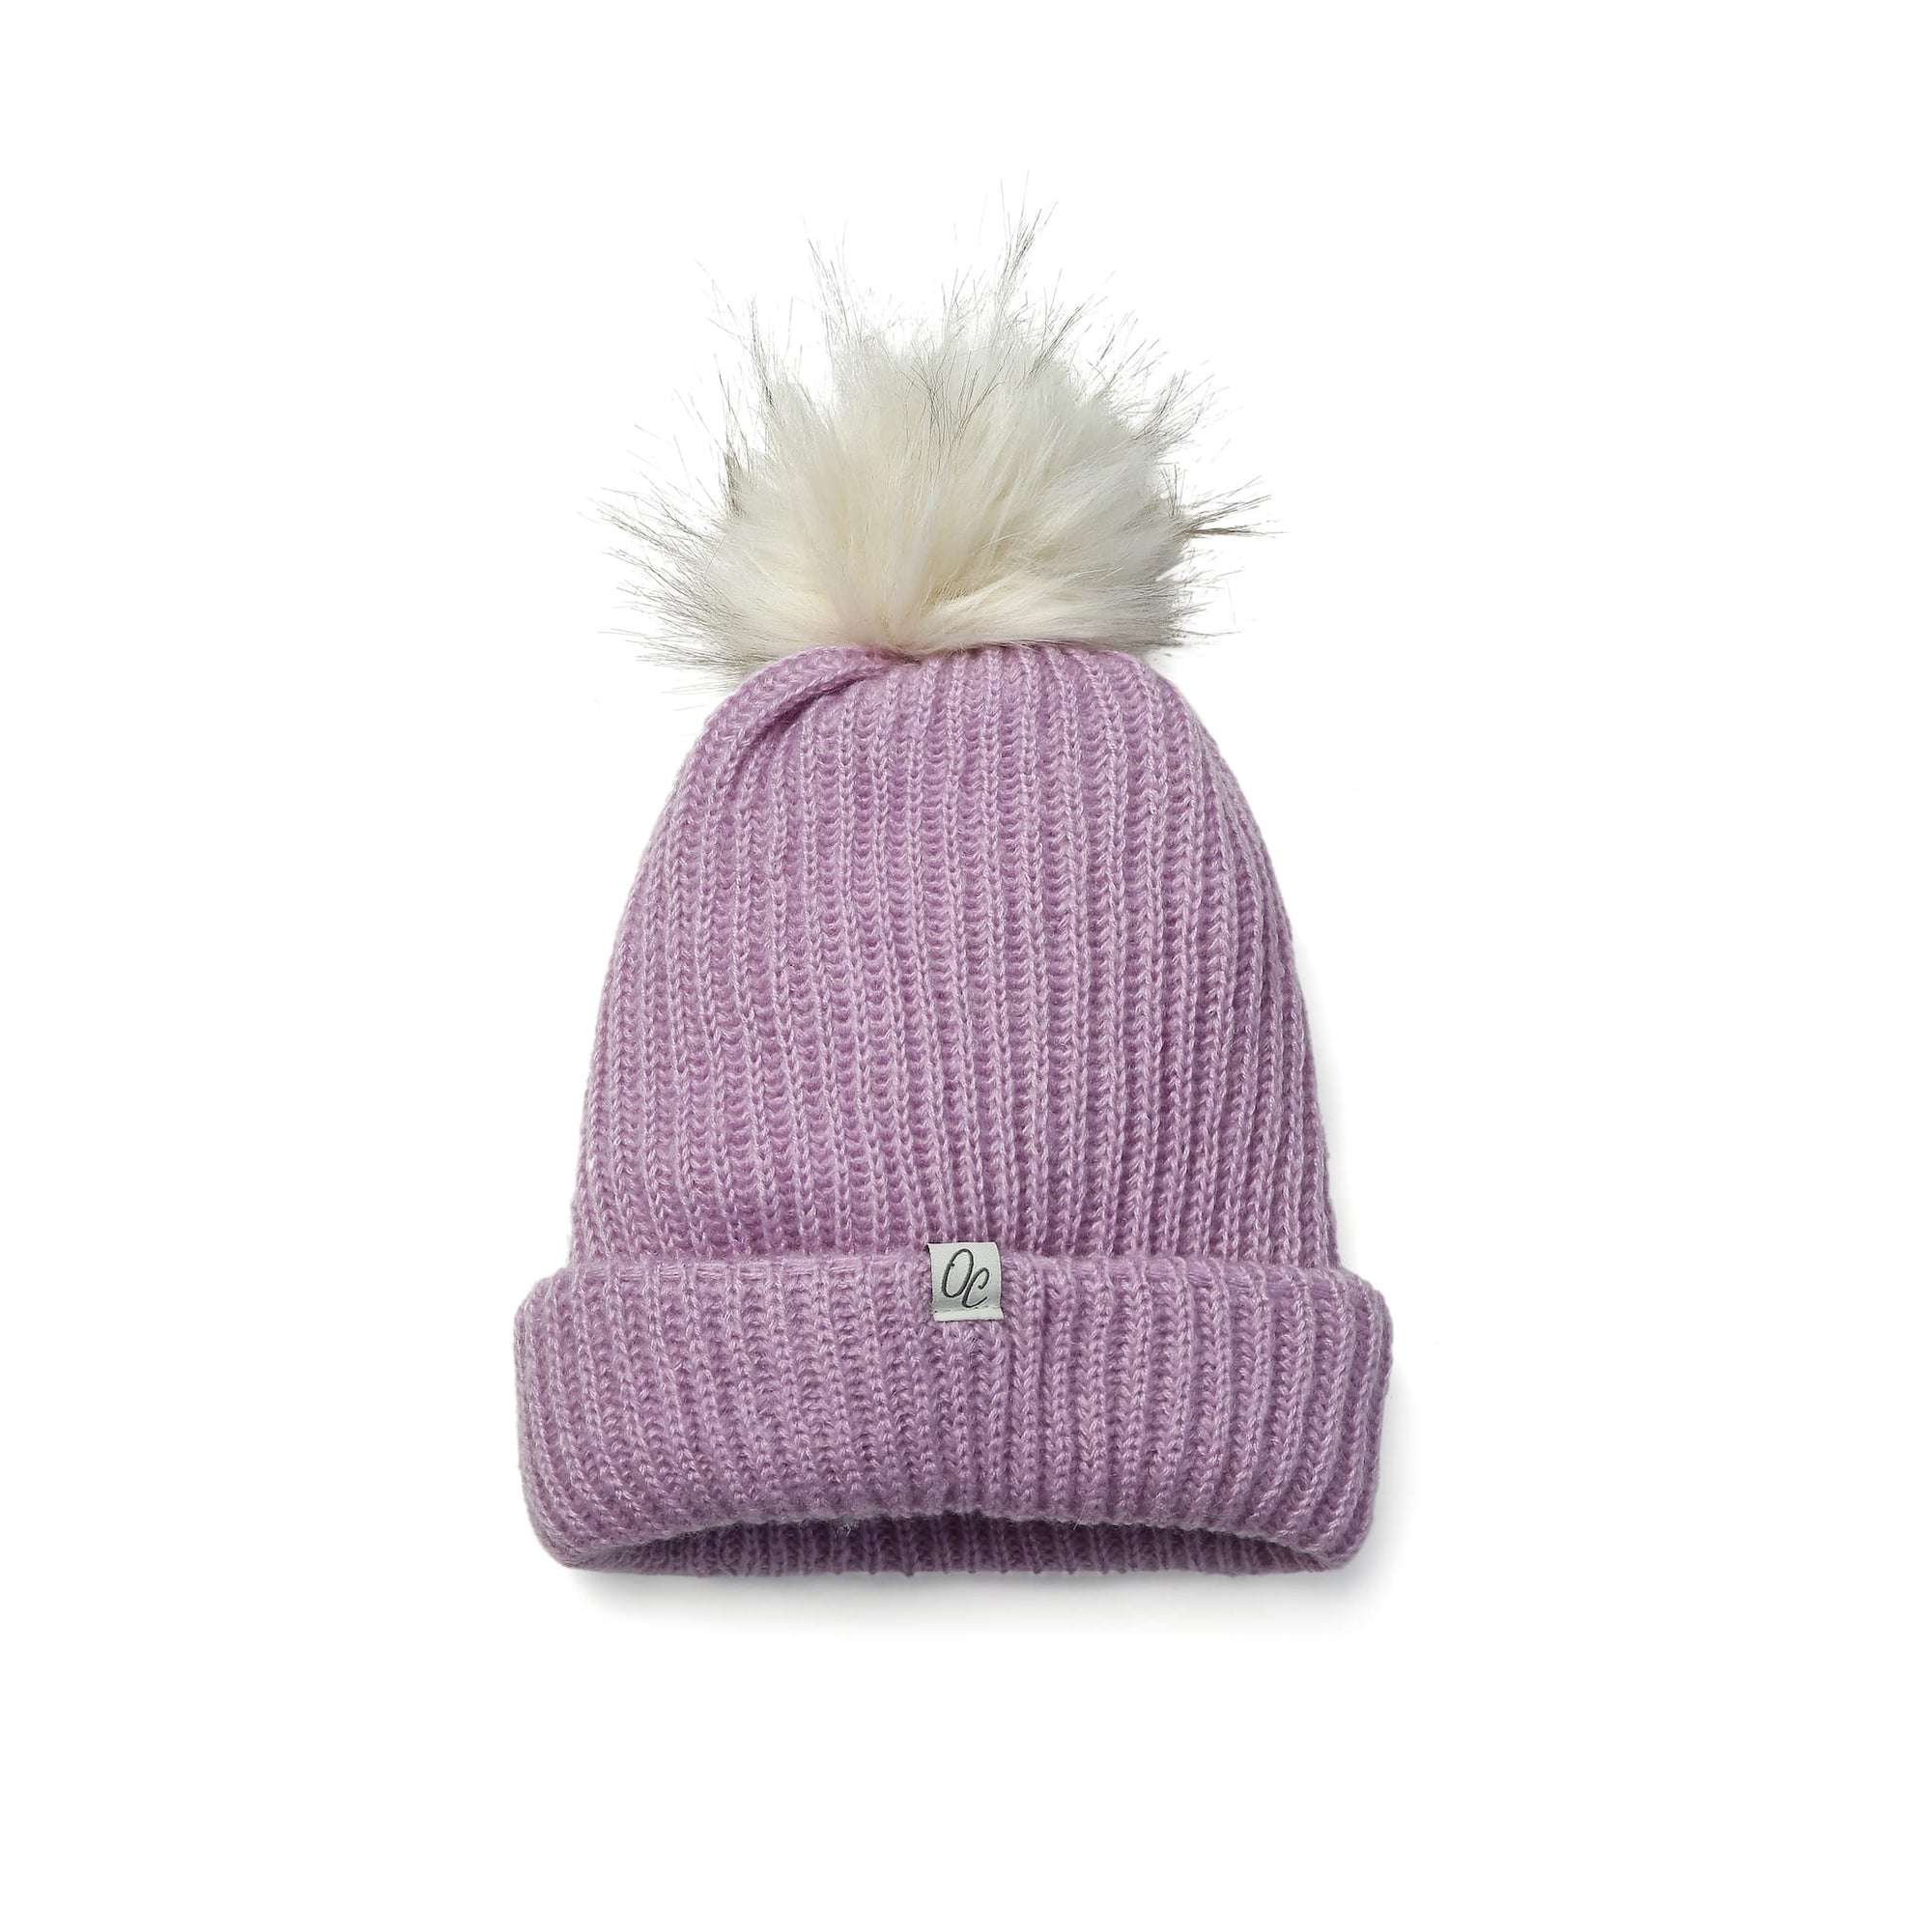 Only Curls Satin Lined Knitted Beanie Hat - Lilac with Pom Pom - Only Curls